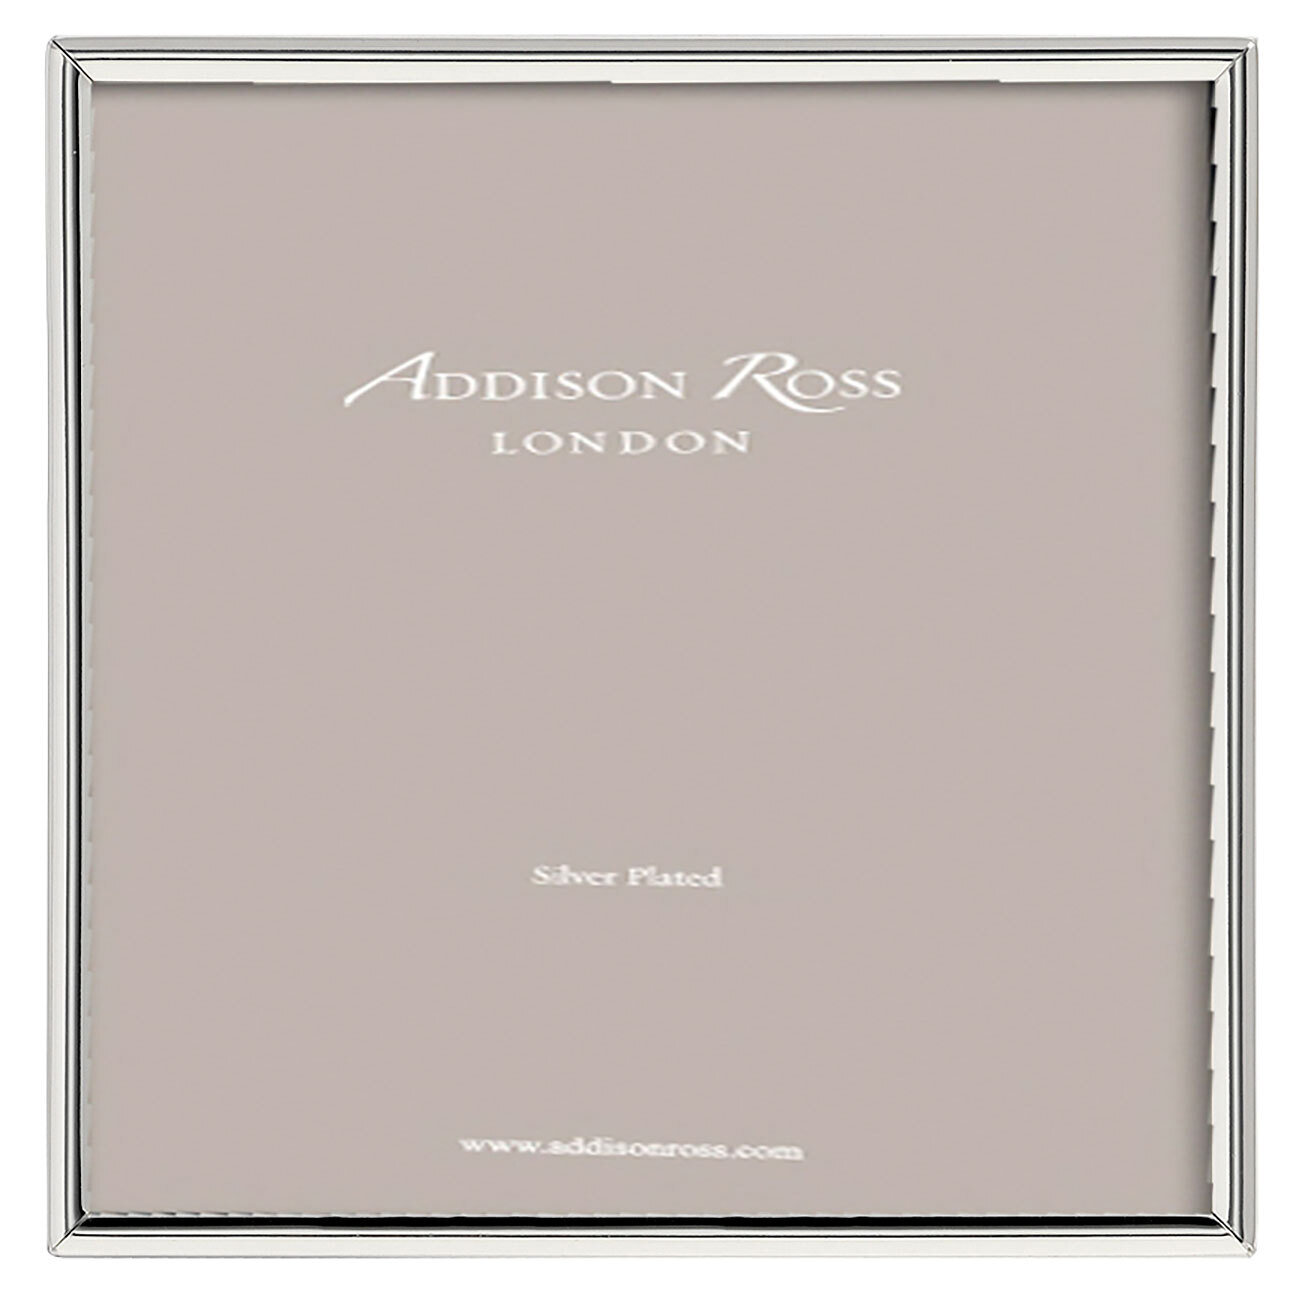 Addison Ross Fine Edged Square Silver Photo Frame 5 x 5 InchSilver-plated FR0511